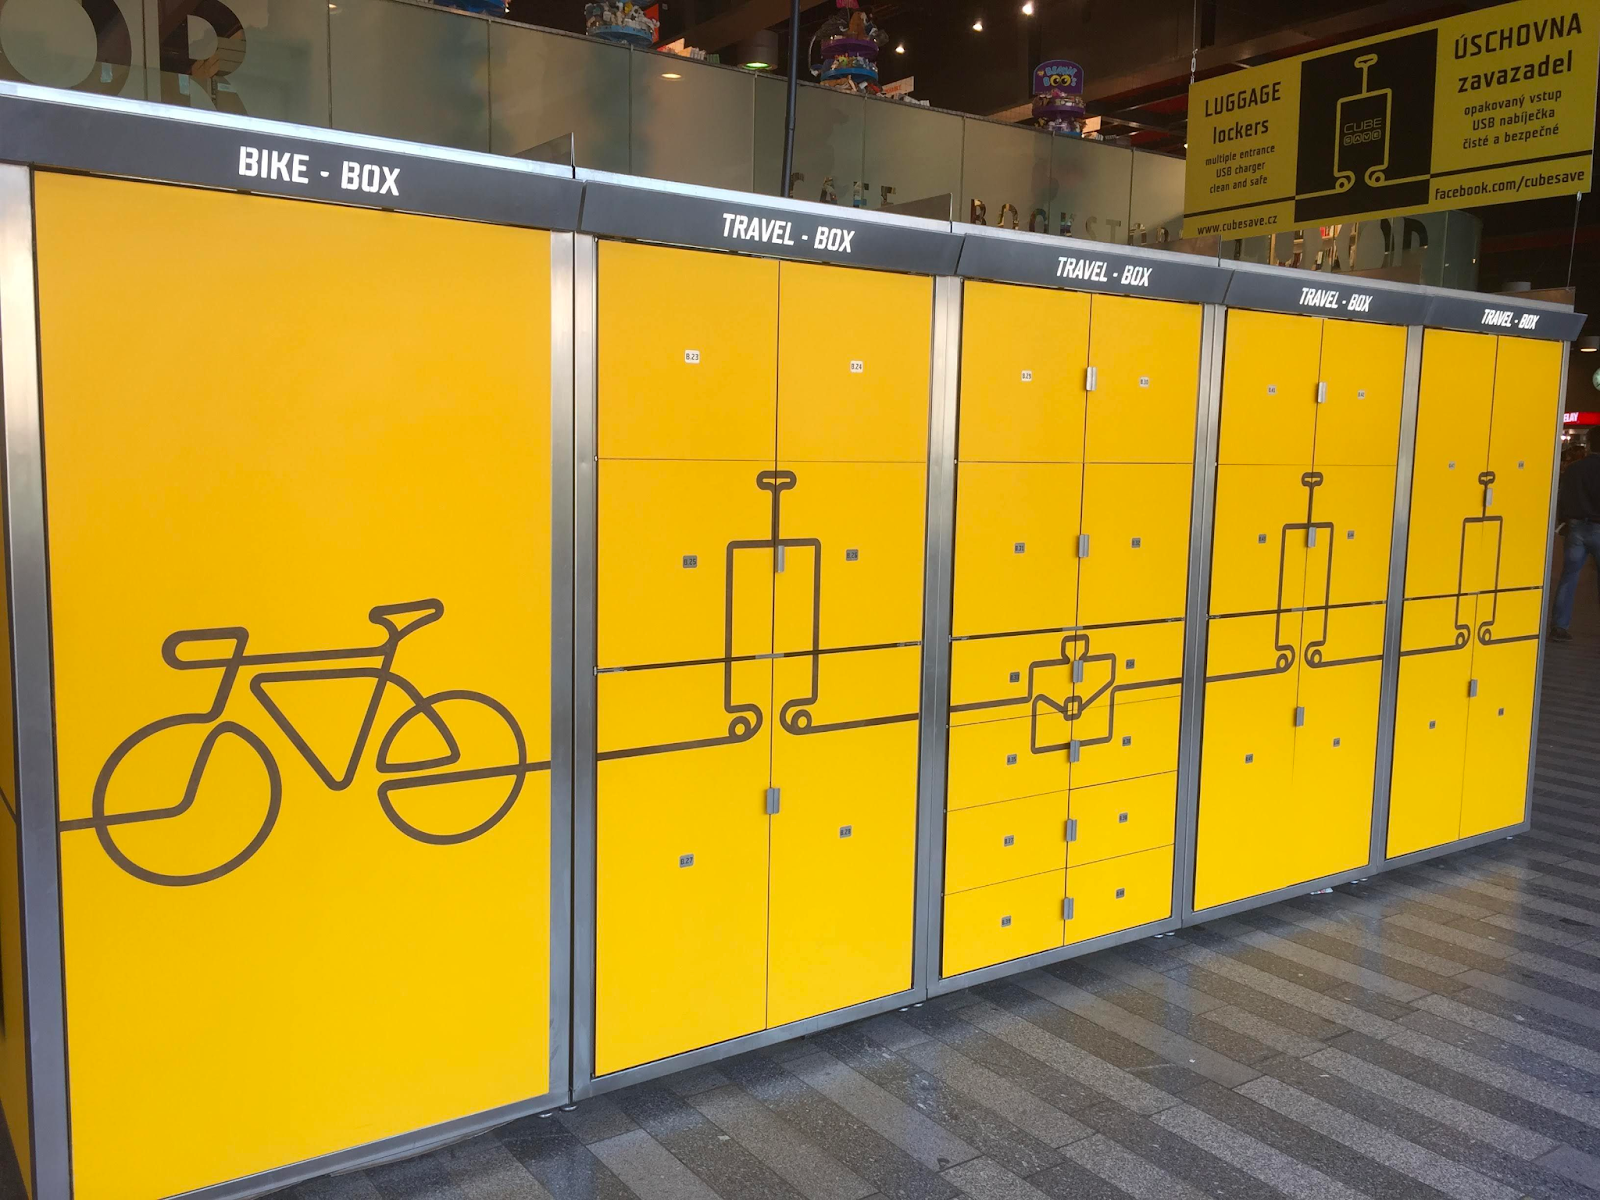 Station and airport lockers